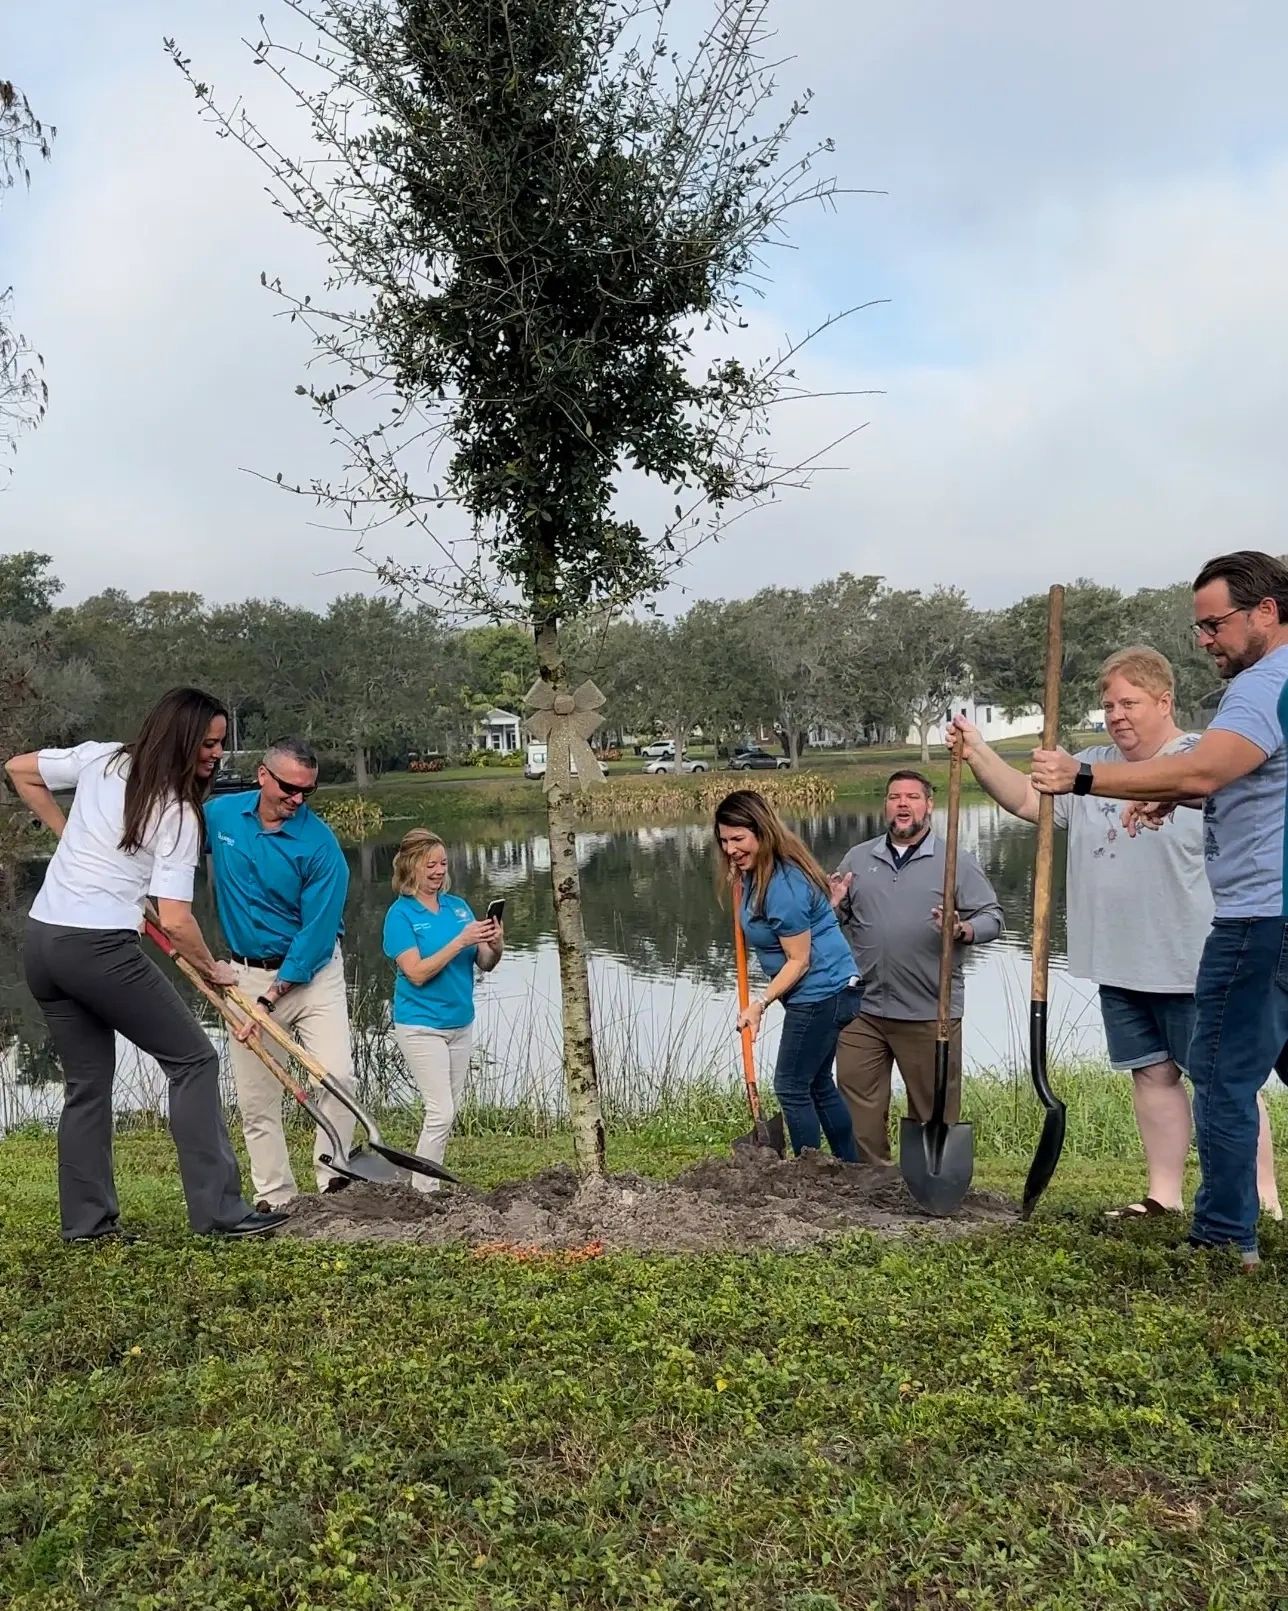 St Petersburg City Council and Parks Department planting Live Oak Tree with The GRANNAN Group